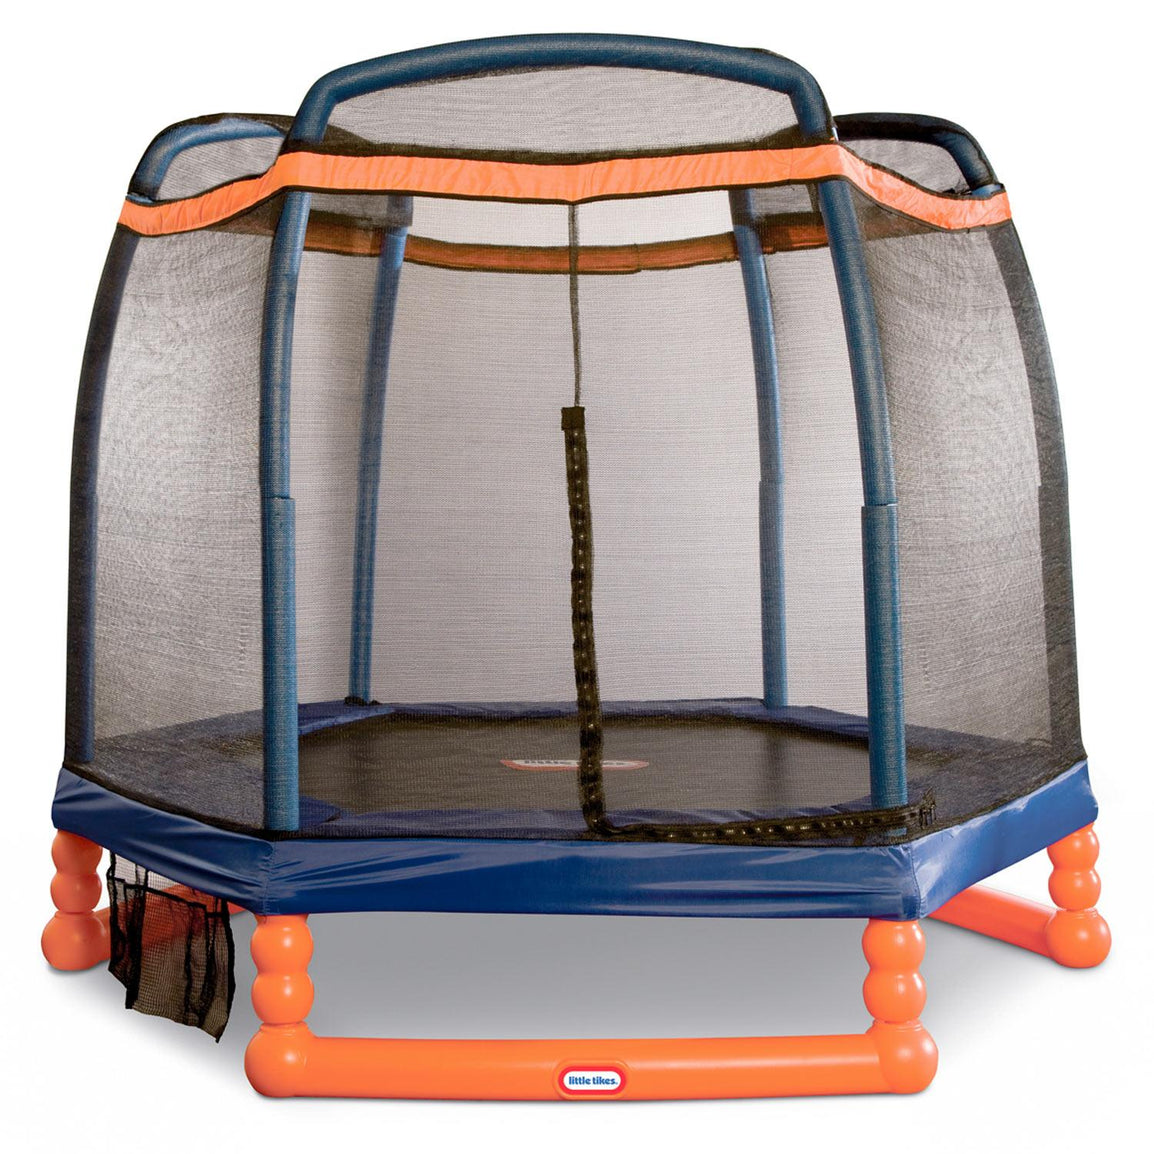 A perfect starter trampoline for toddlers and older kids